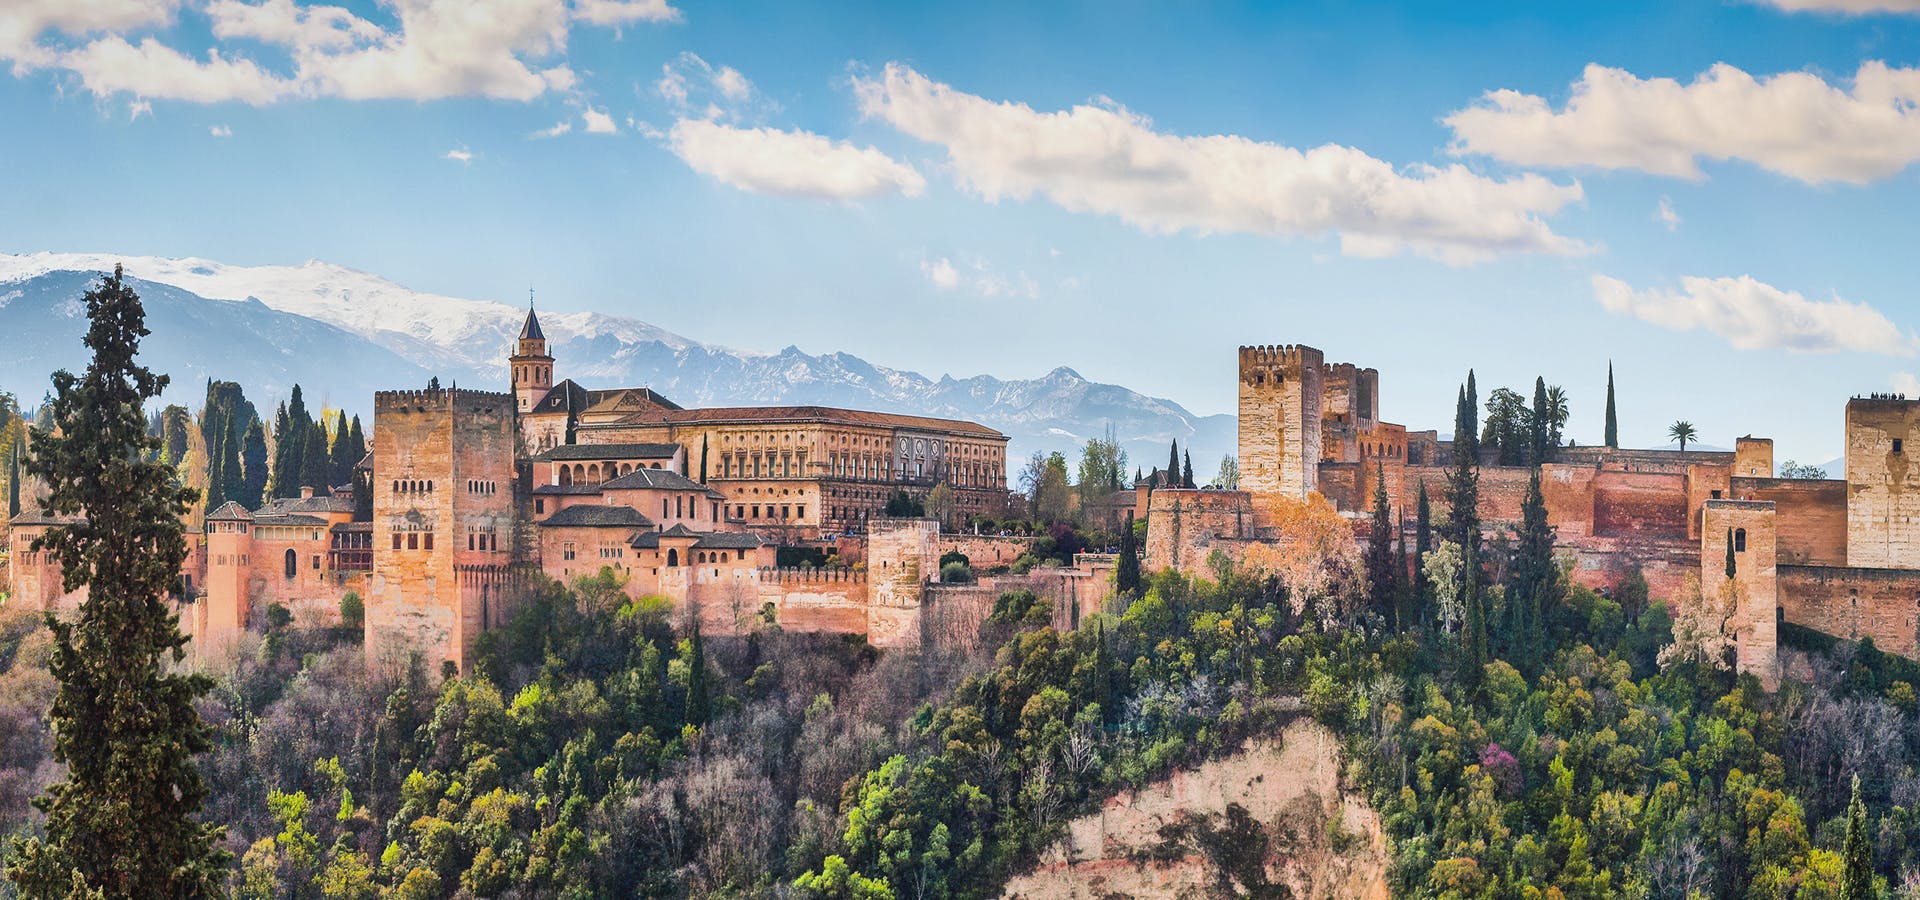 Tour with tickets included to the entire Alhambra (Palacios, Alcazaba, Generalife, Gardens)